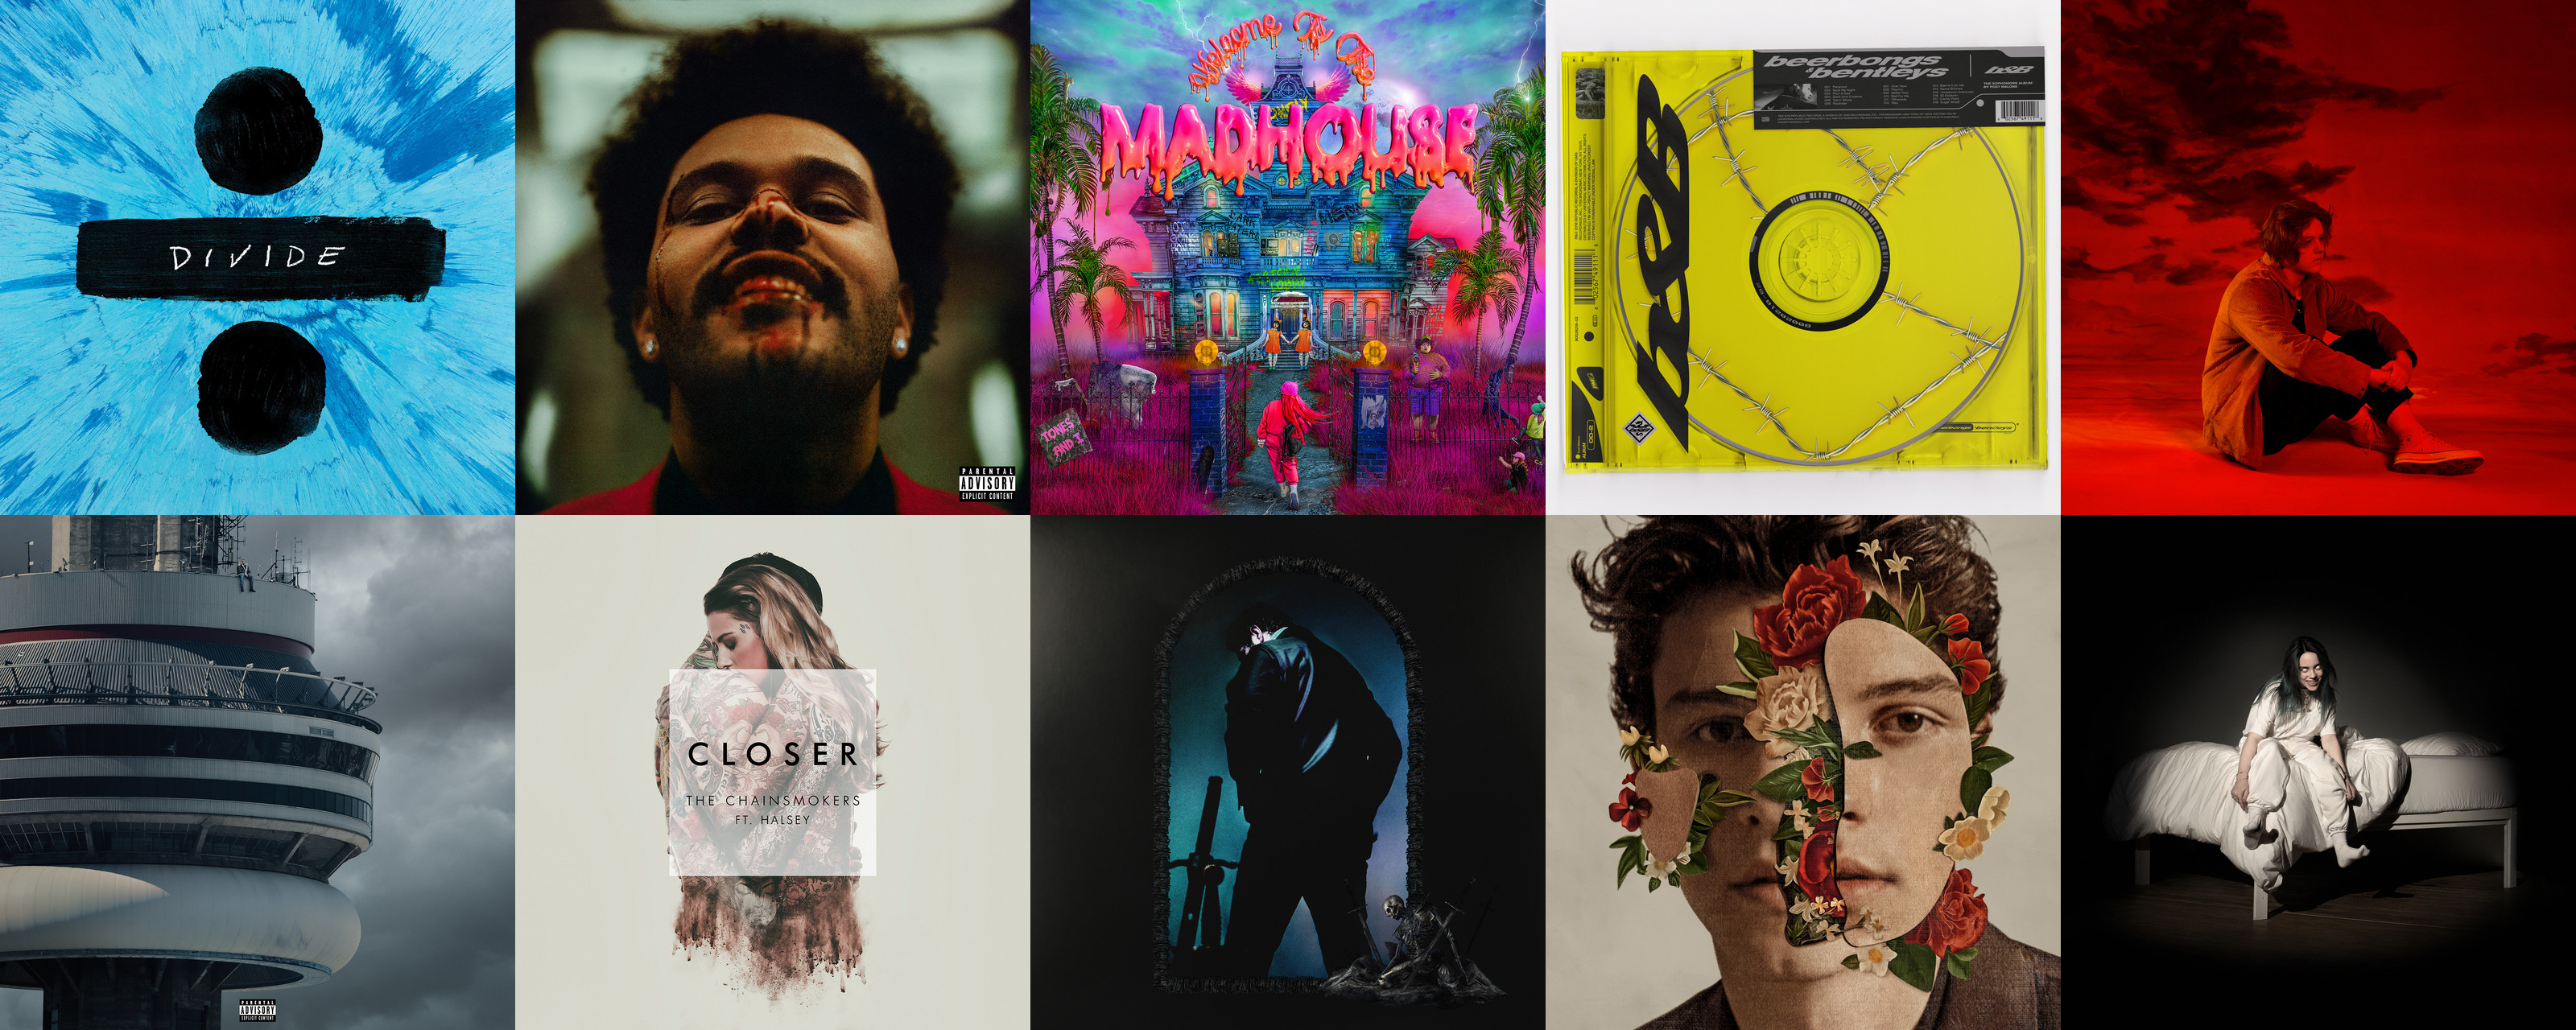 Top 10 most-streamed songs on Spotify – the all-time most popular tracks